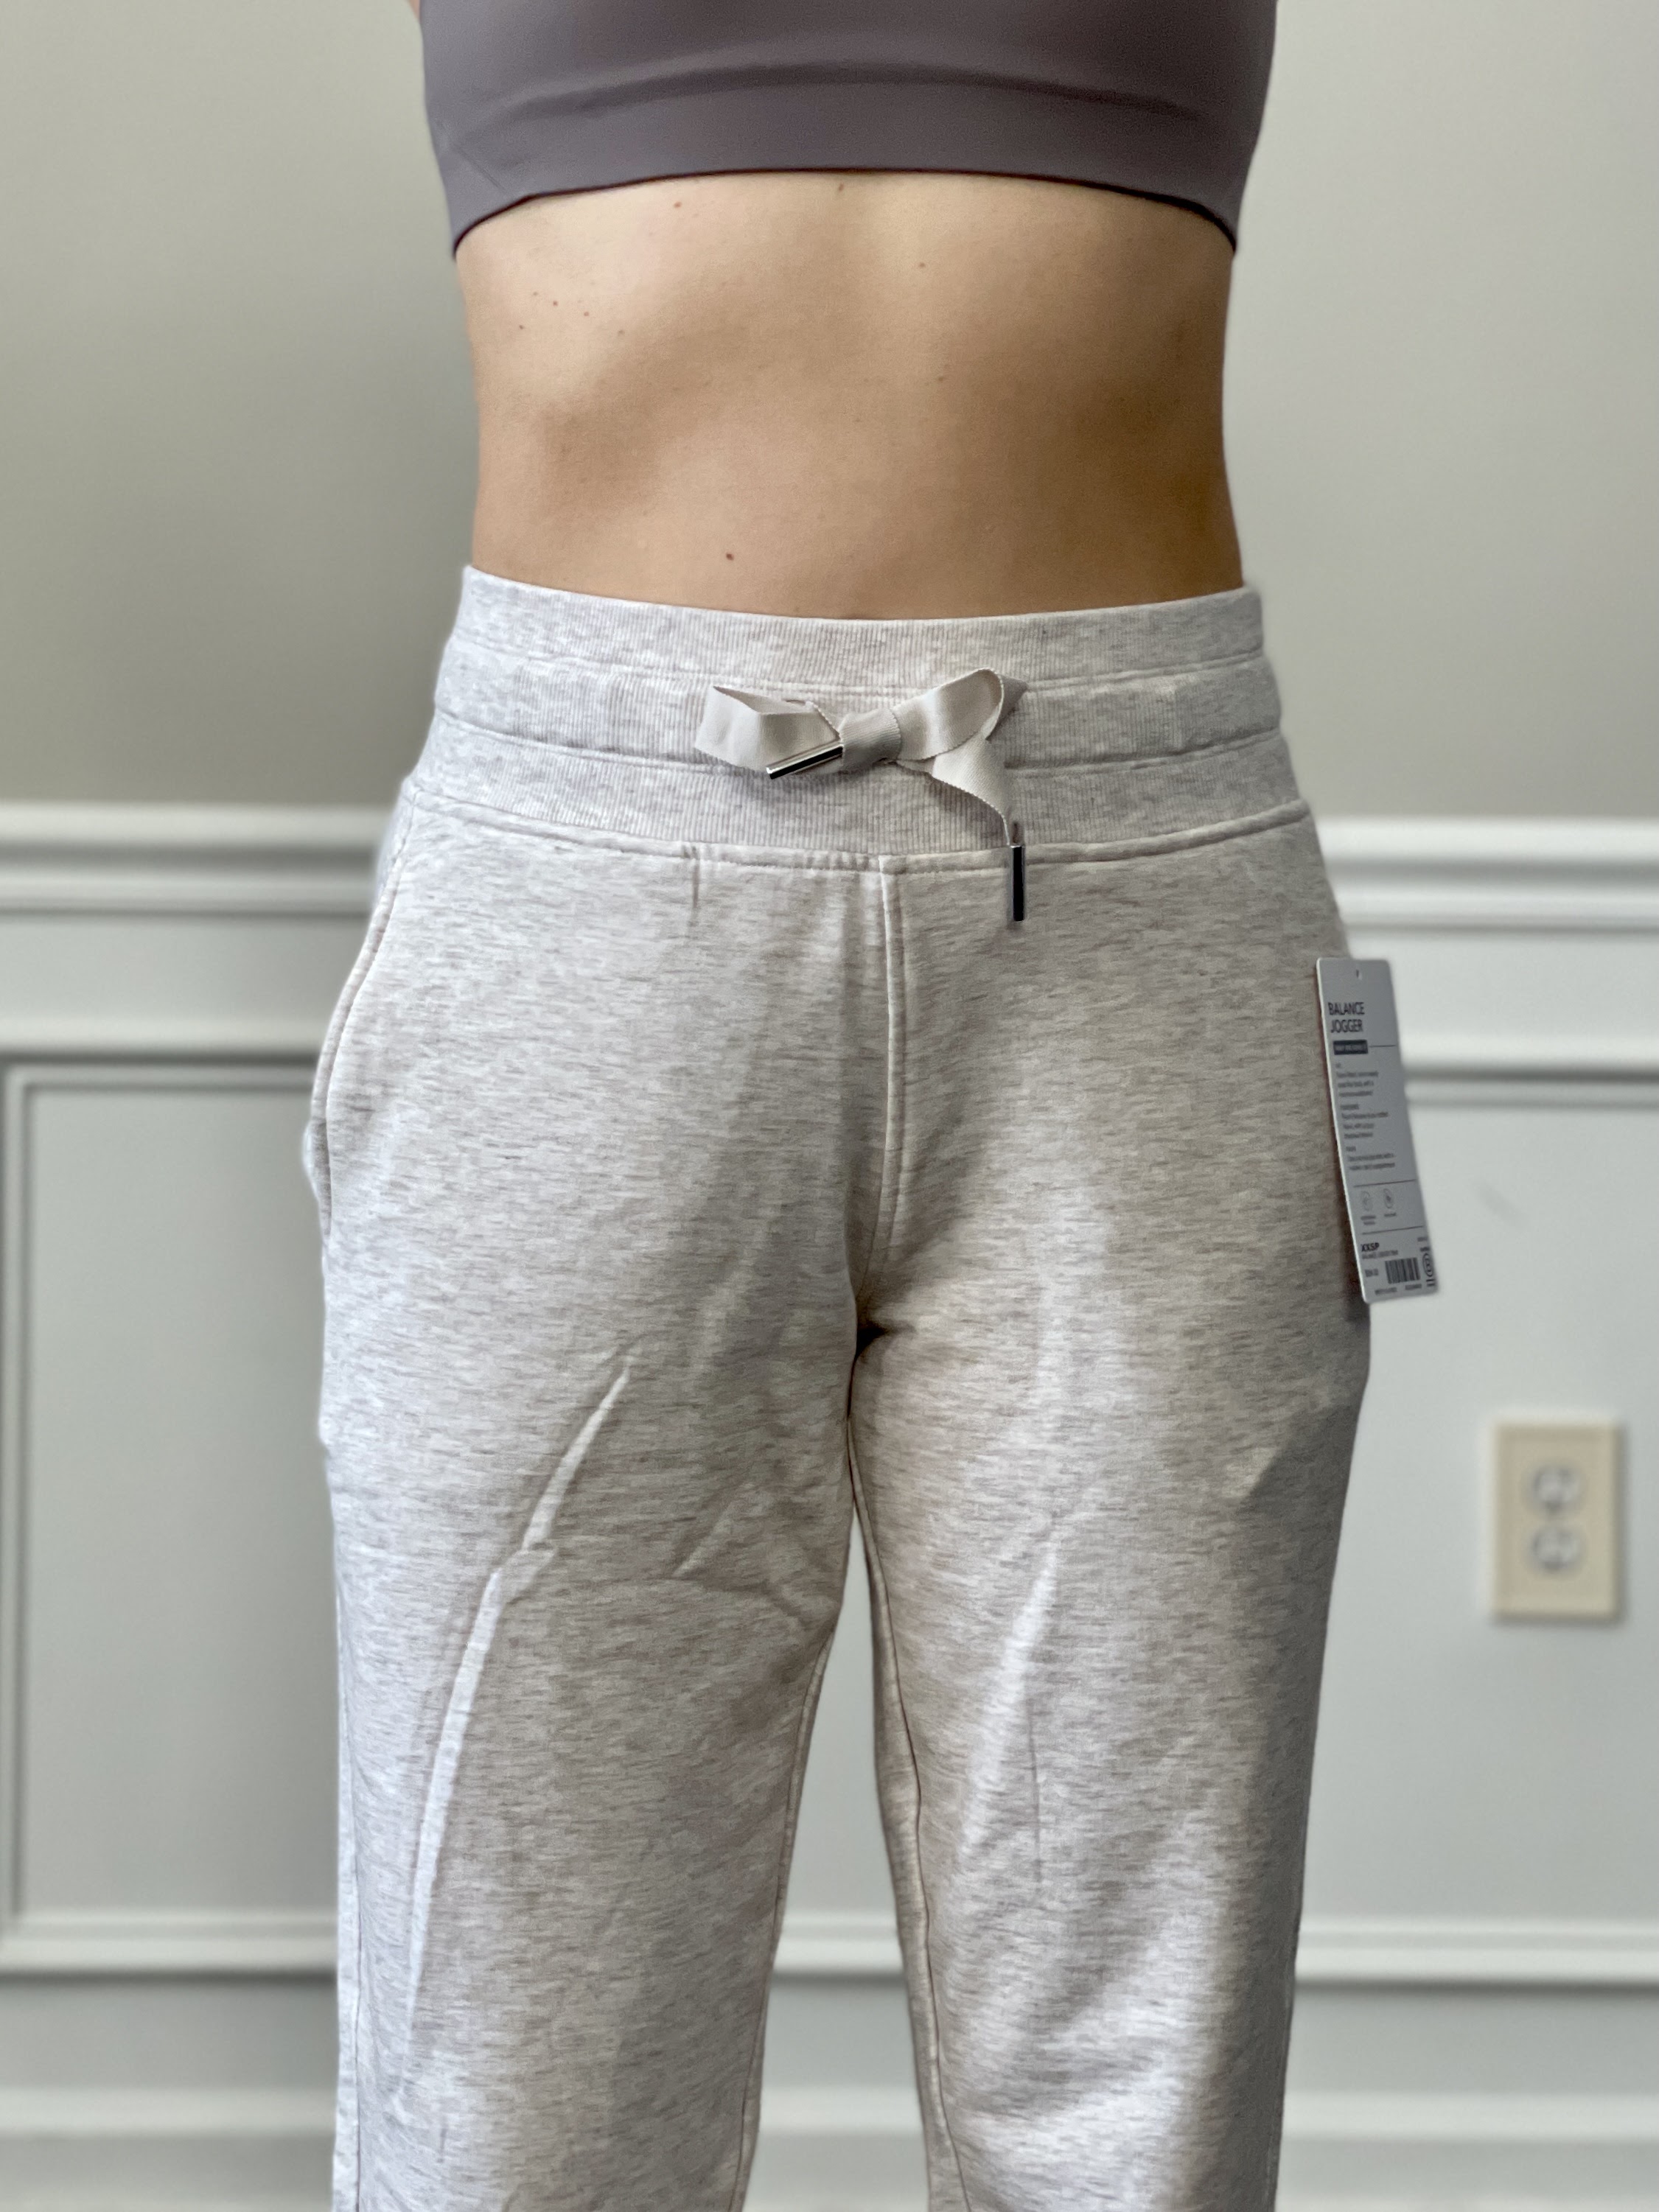 9 Lululemon Dupes That Will Shock You! - Healthy By Heather Brown